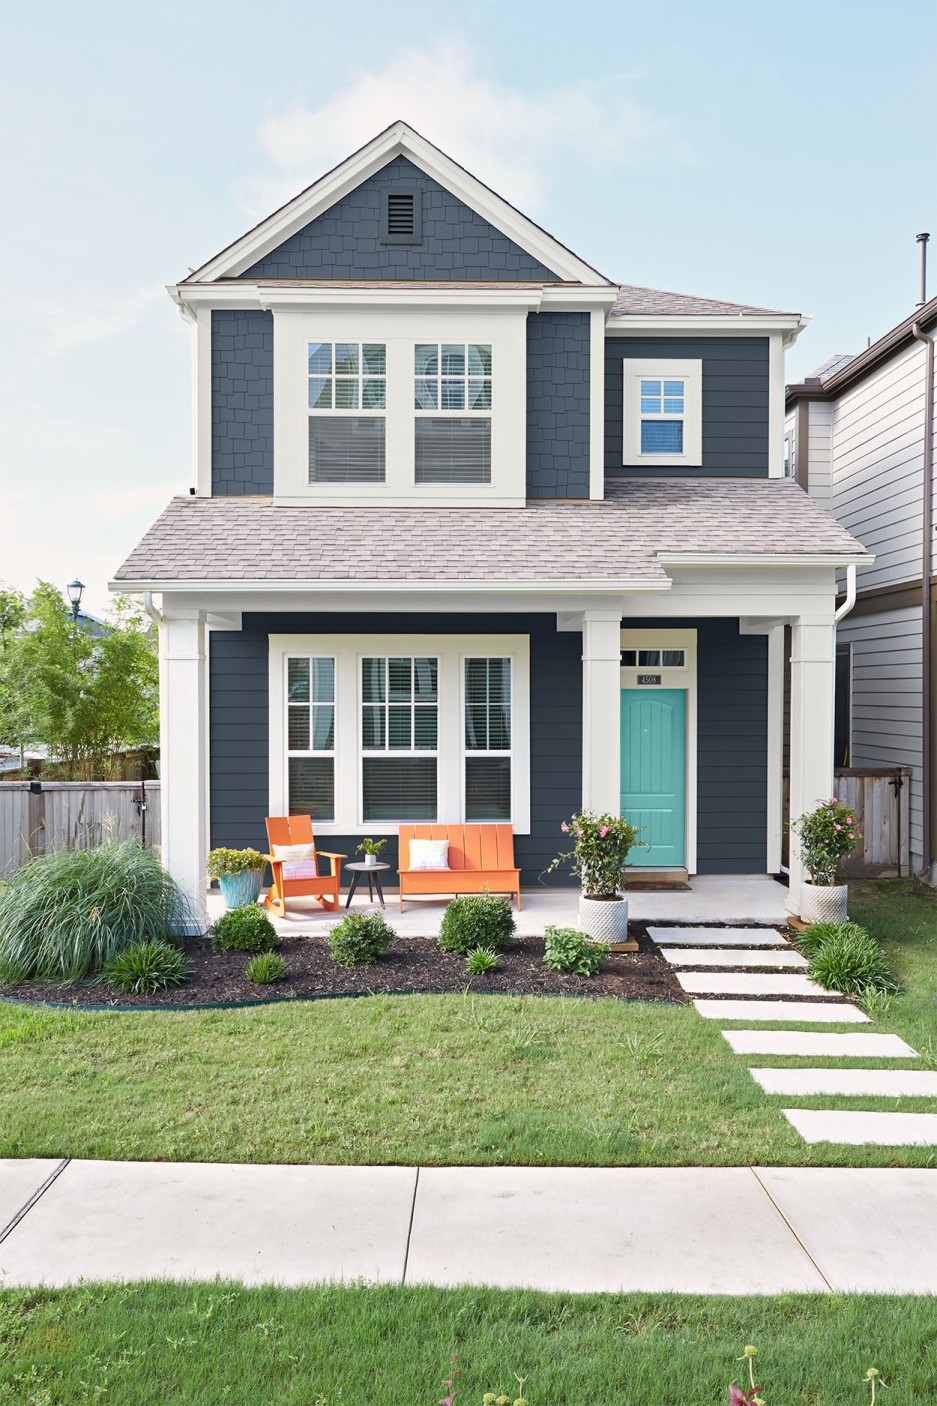 How to Choose Exterior House Colors So Your Home Looks Its Best